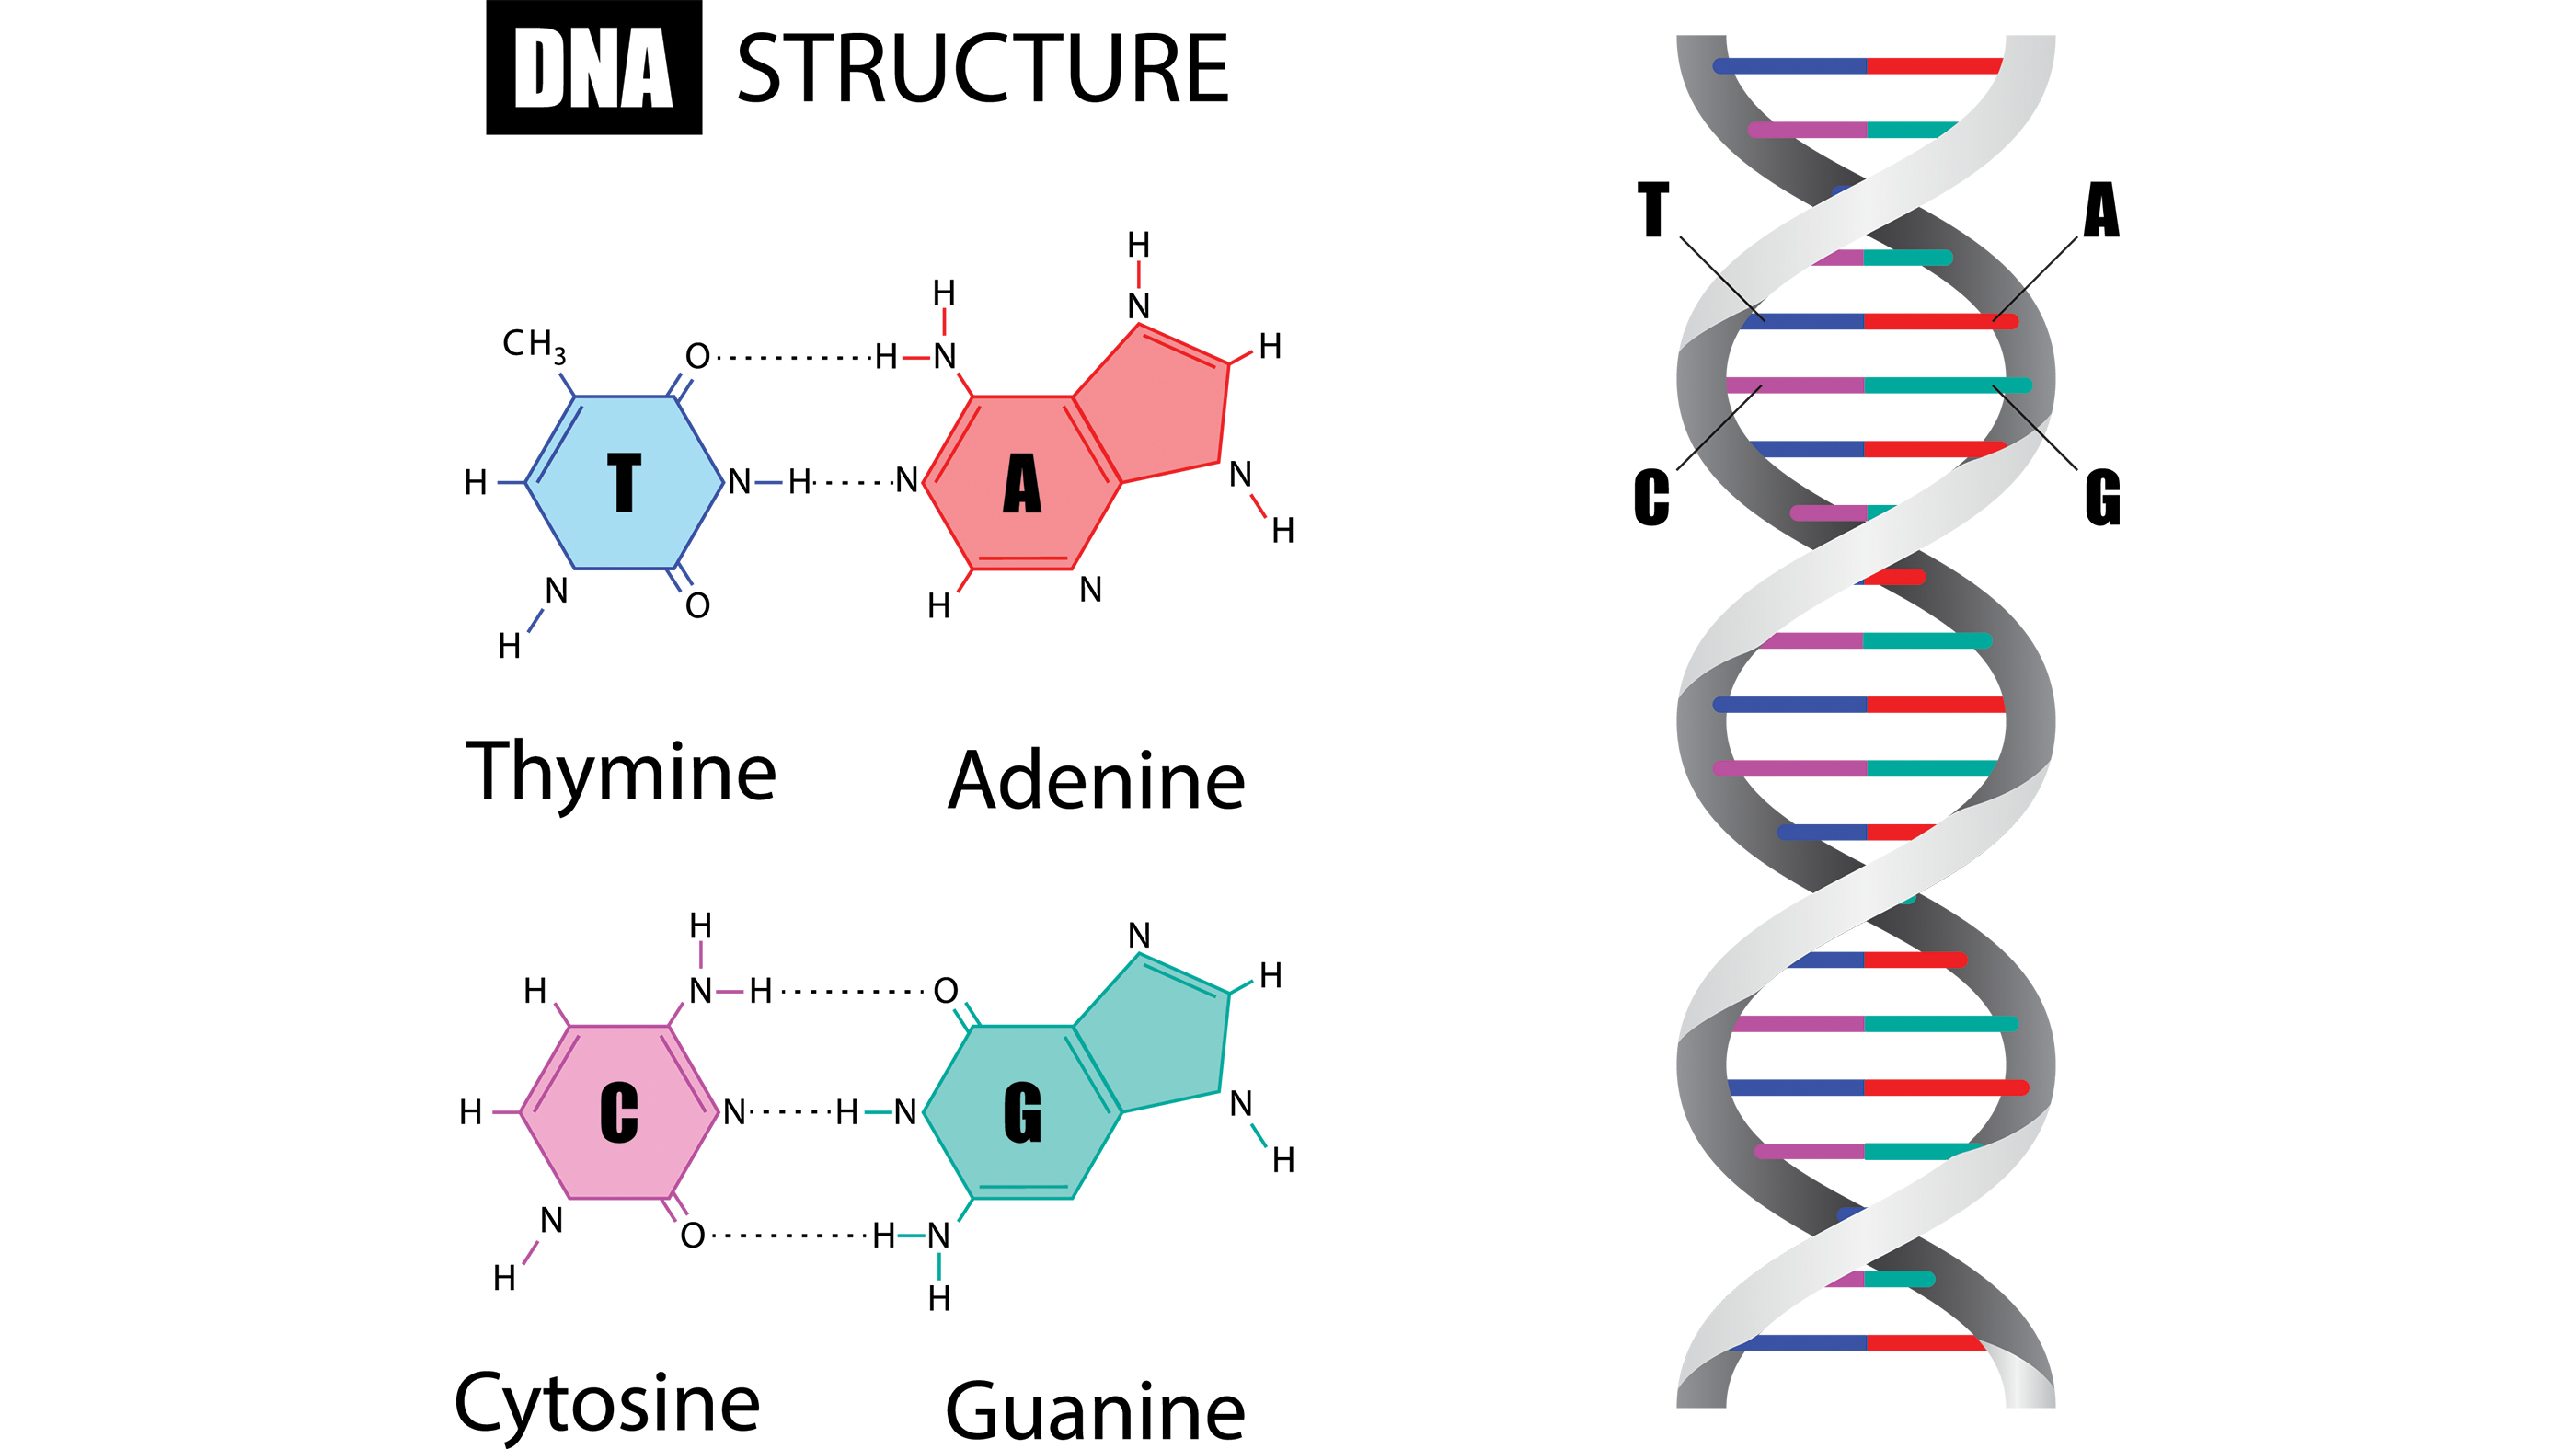 DNA is a double-stranded molecule whose "rungs" are made up of one of two base pairs: adenine paired with thymine or cytosine paired with guanine.